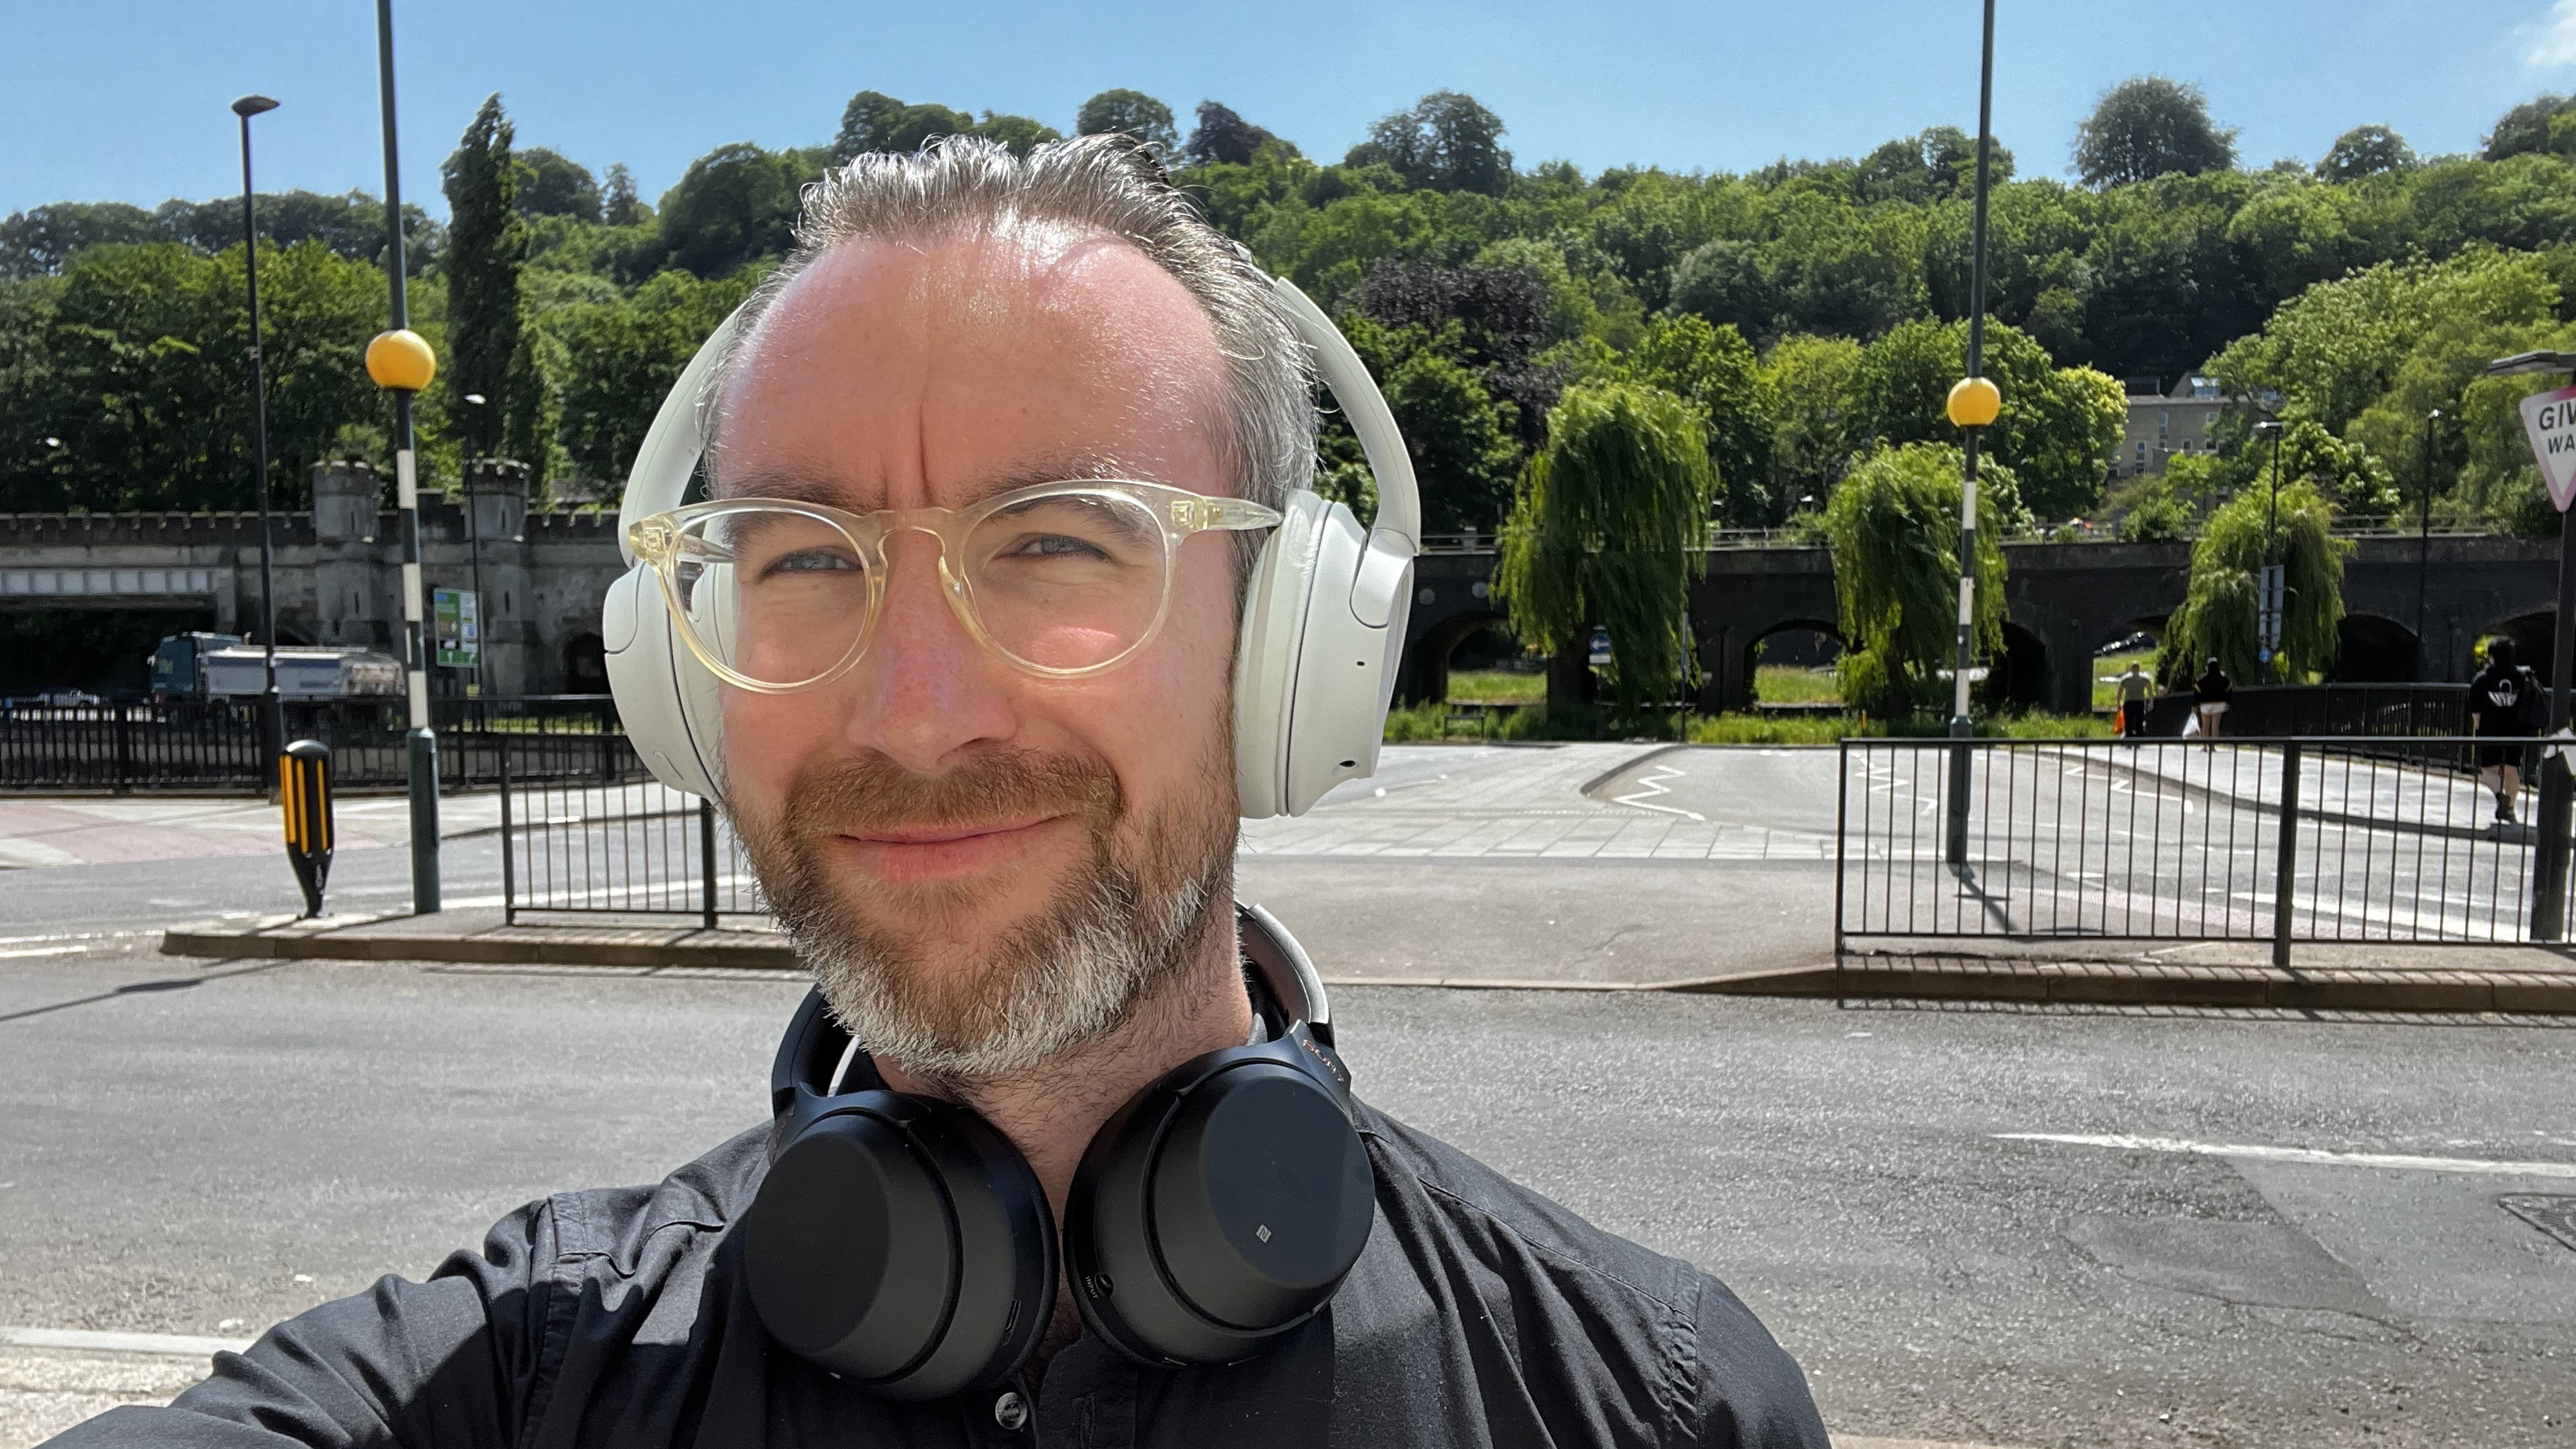 Sony WH-CH520N headphones worn by TechRadar Editor Matthew Bolton, near a road, who has a pair of Sony WH-1000XM3 headphones around his neck too